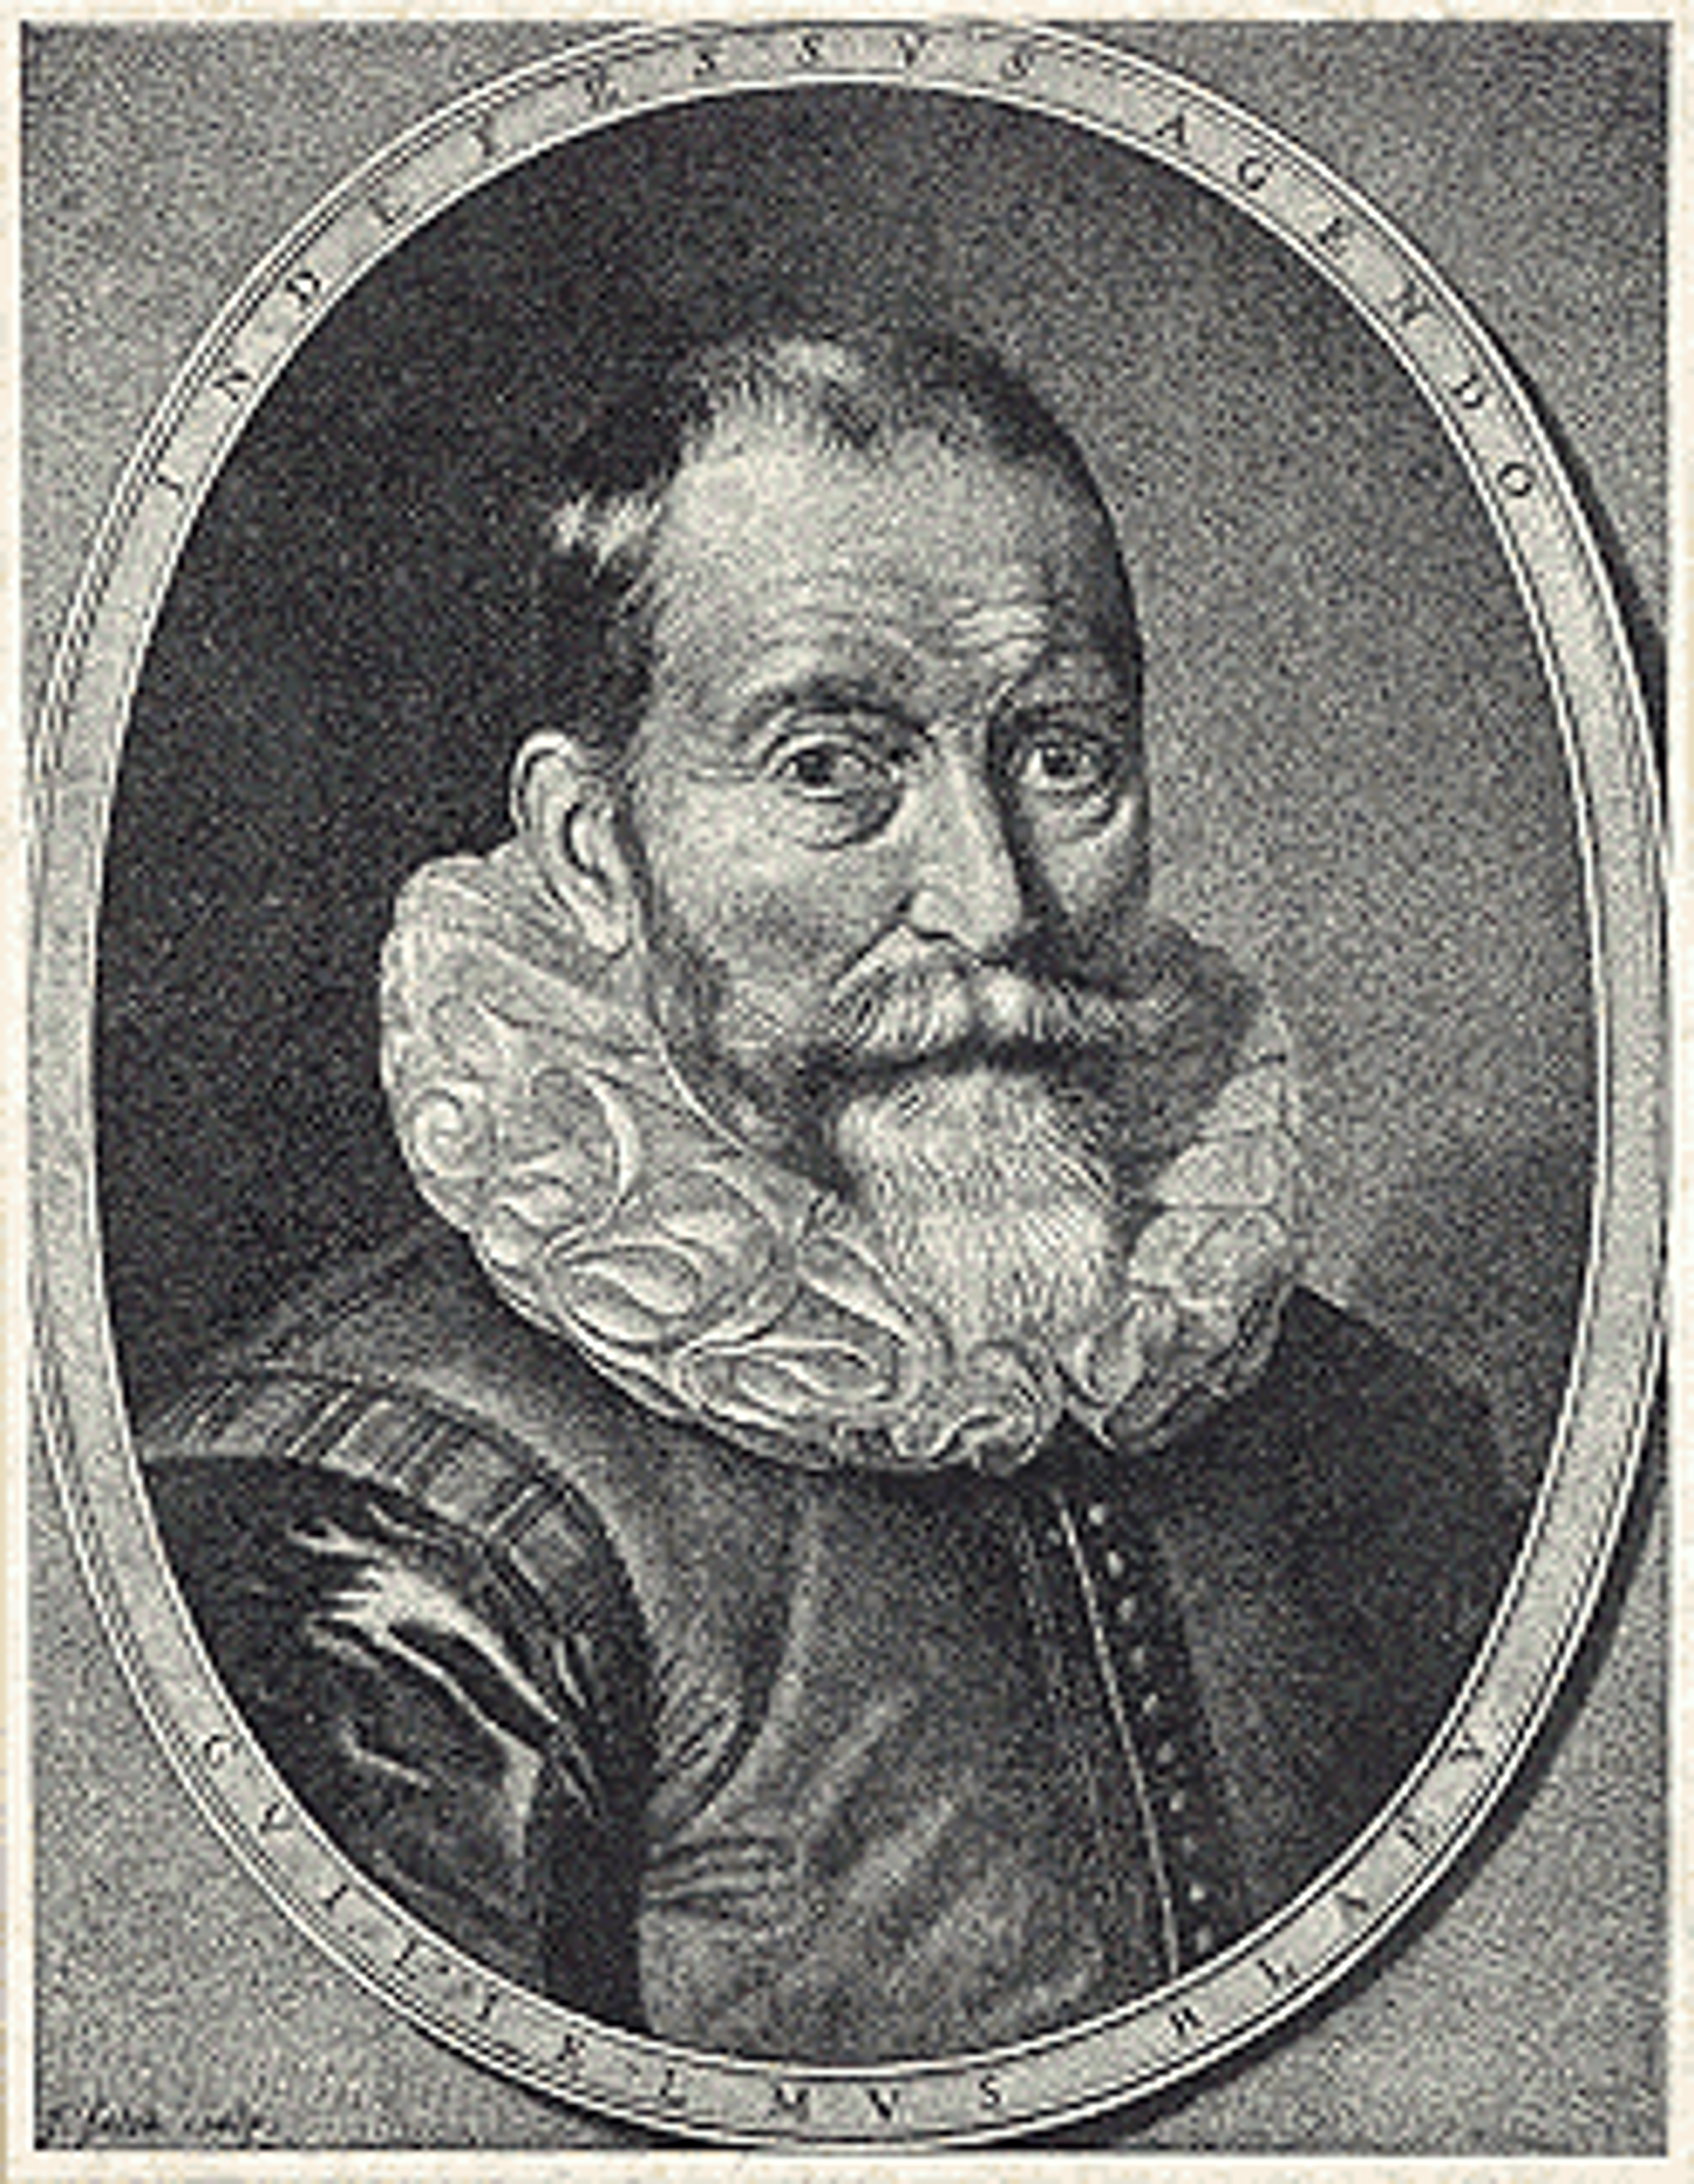 A black and white portrait of Willem Janszoon Blaeu, a man with short hair and a beard.